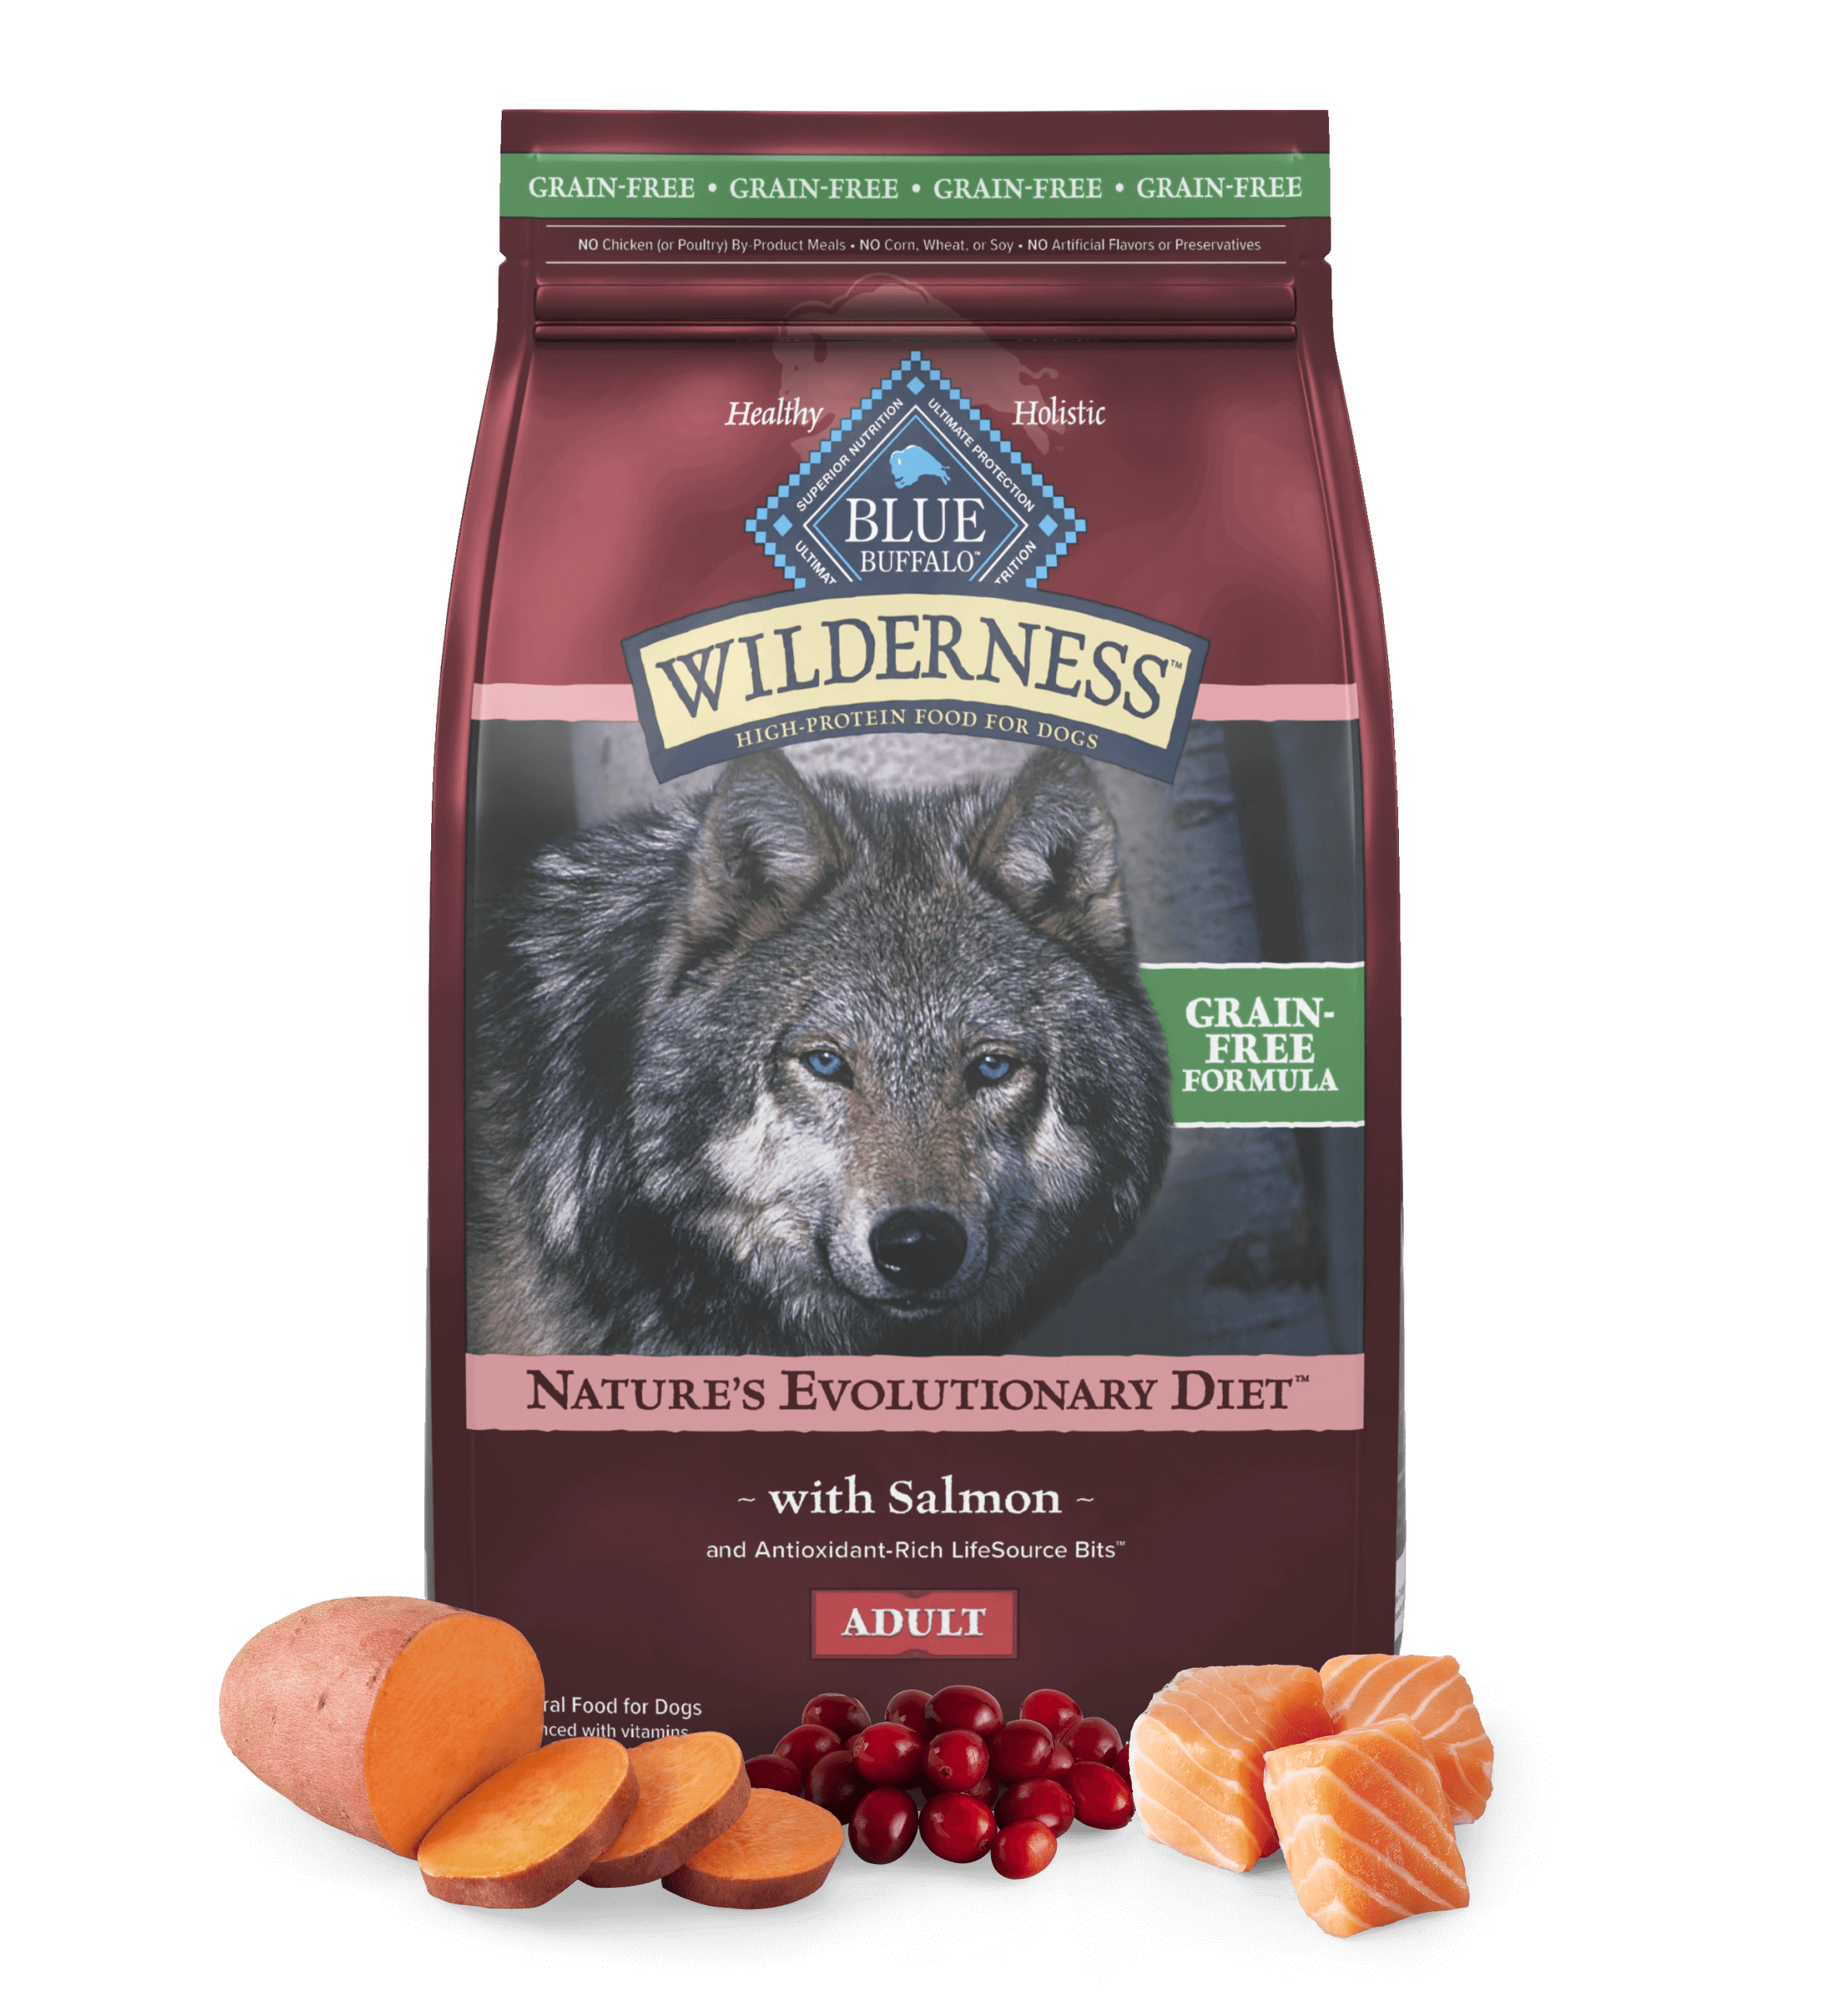 A bag of Wilderness Nature’s Evolutionary Diet with Salmon and LifeSource Bits  Adult Dog – Grain-Free dog dry food